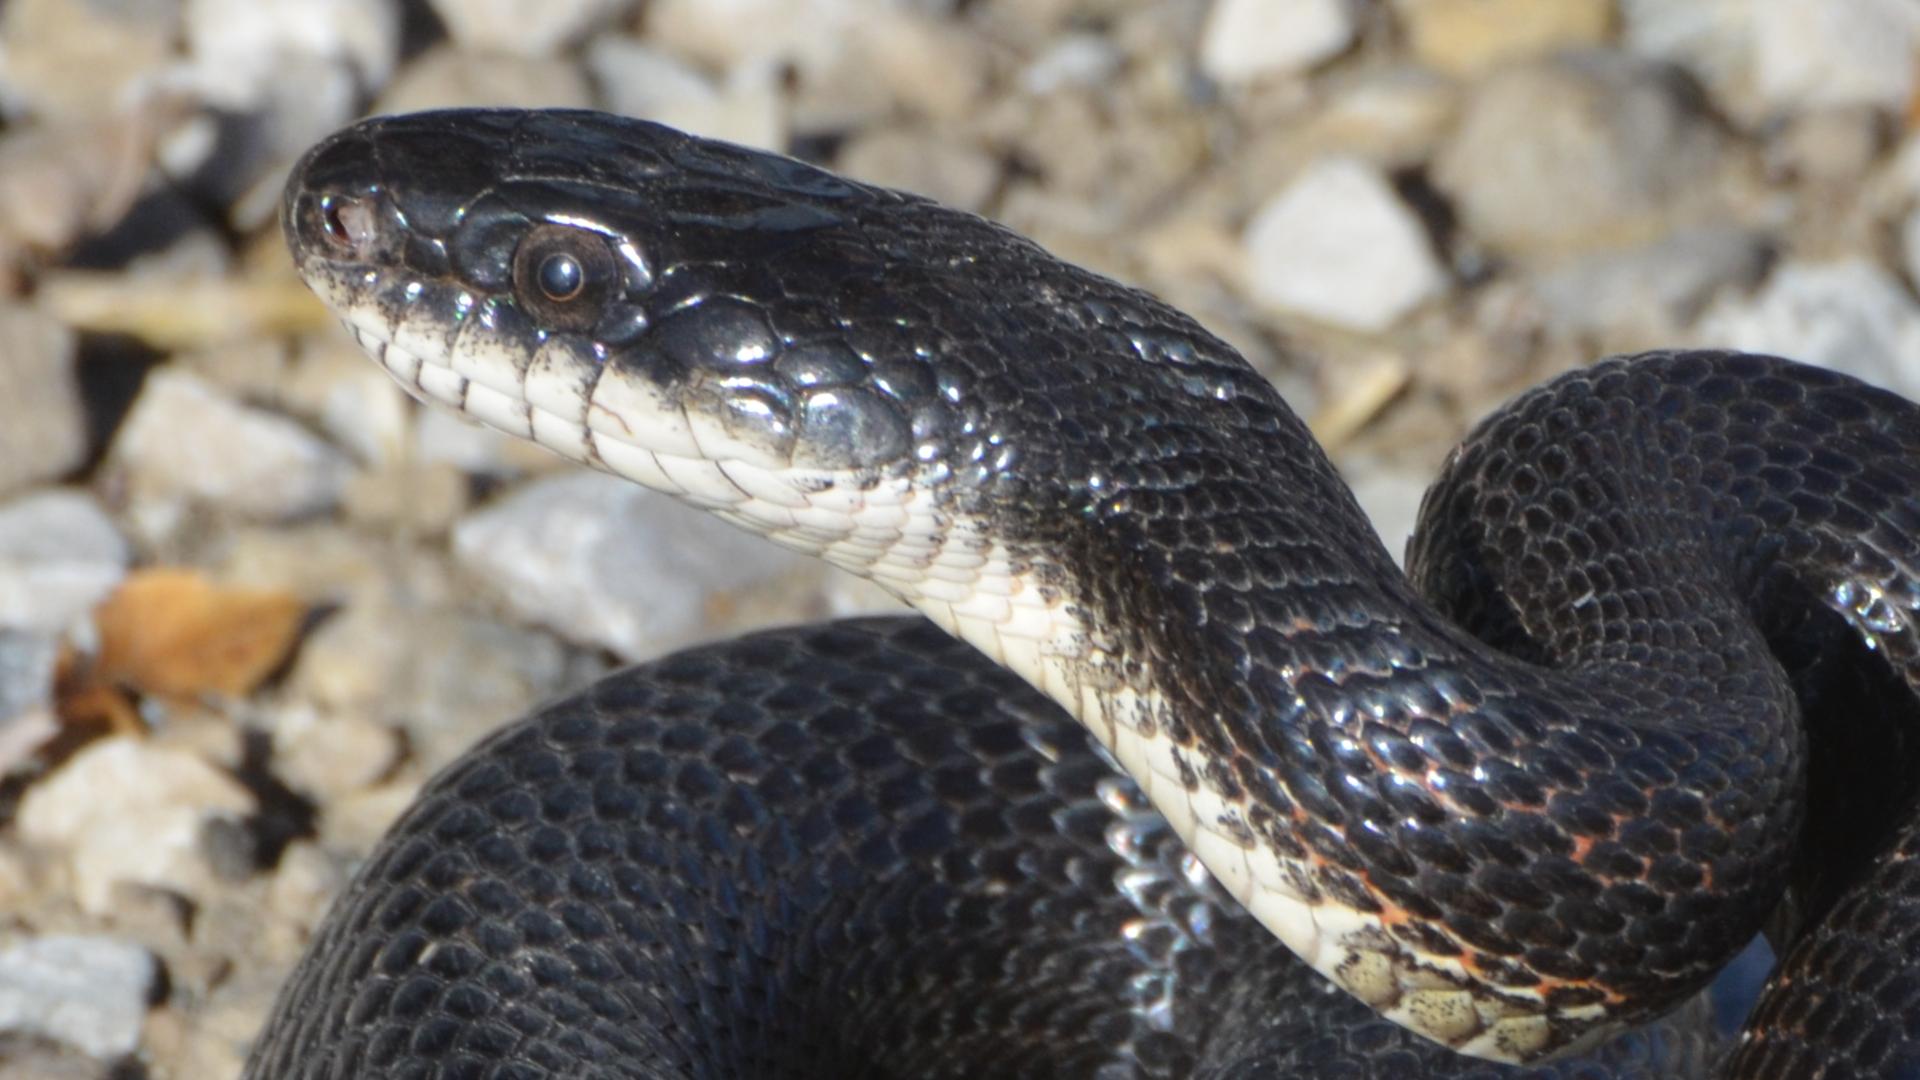 a snake is pictured in a close up picture